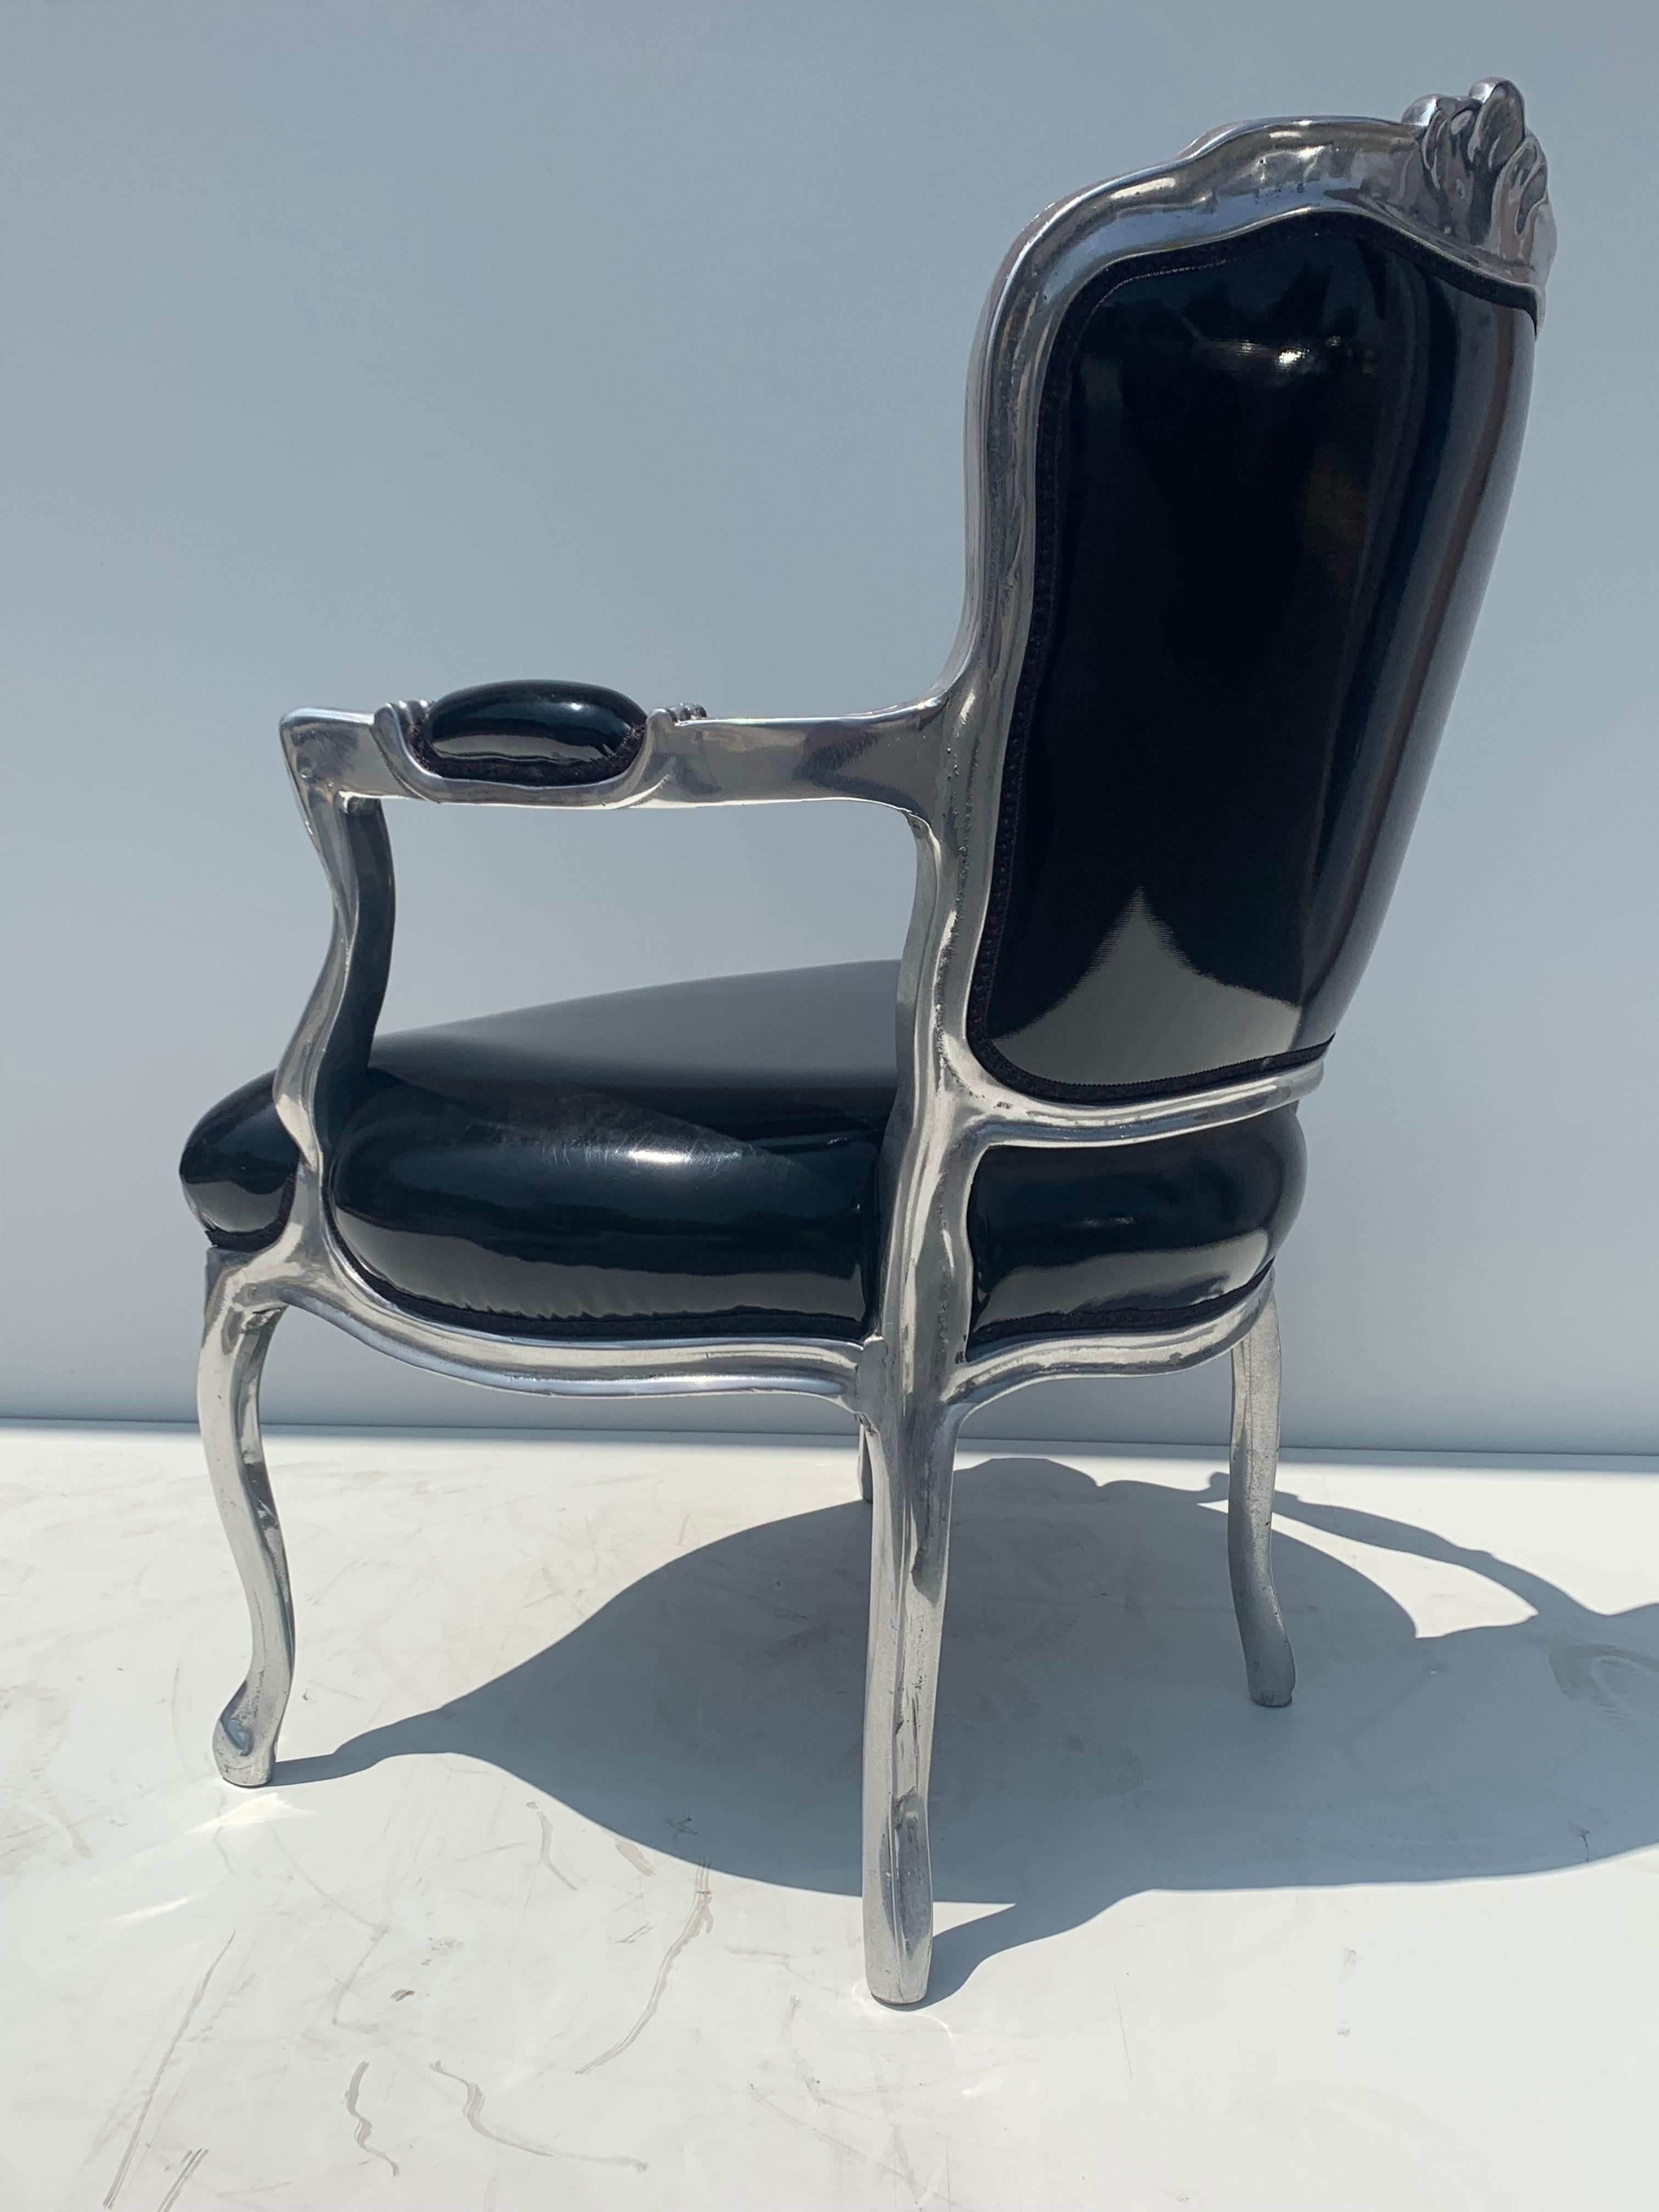 Polished Fauteuil Chair Footrest in Solid Aluminum